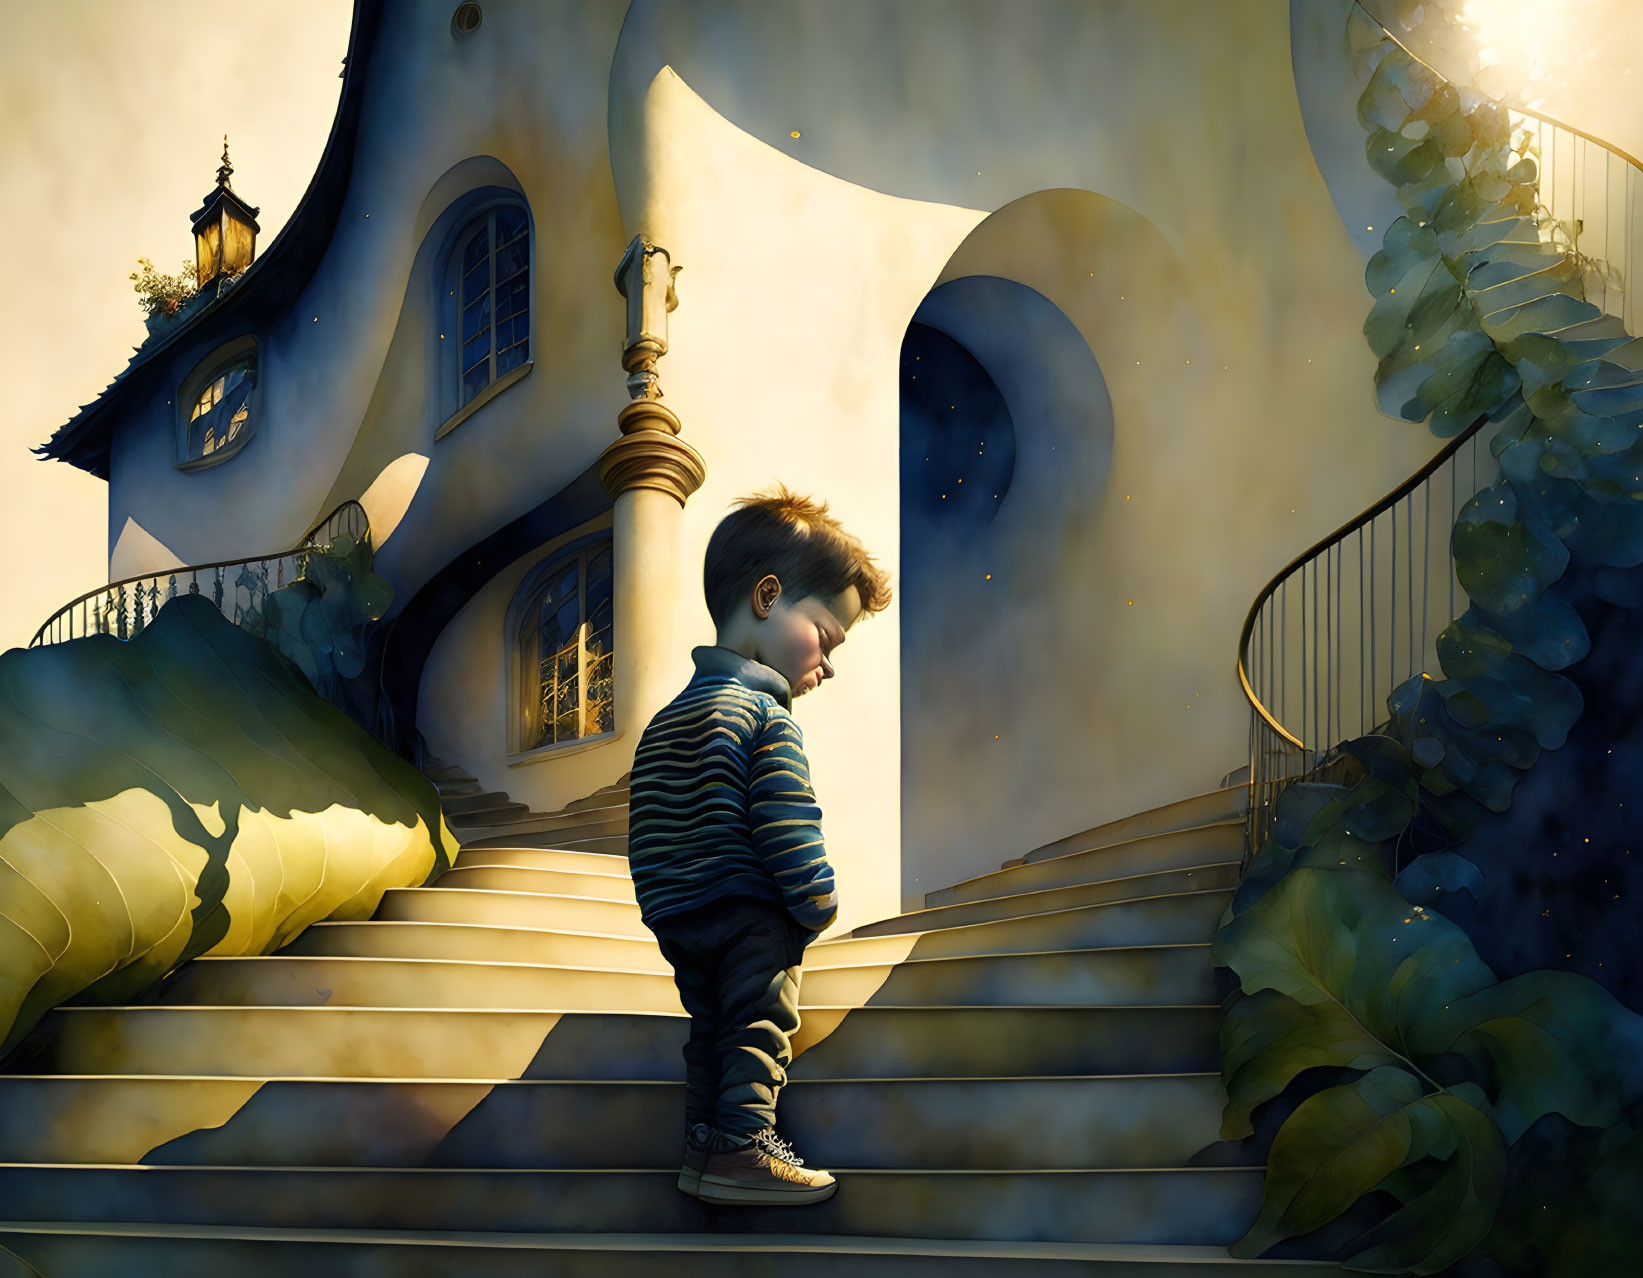 Young boy upset, on the curved stairs of a house